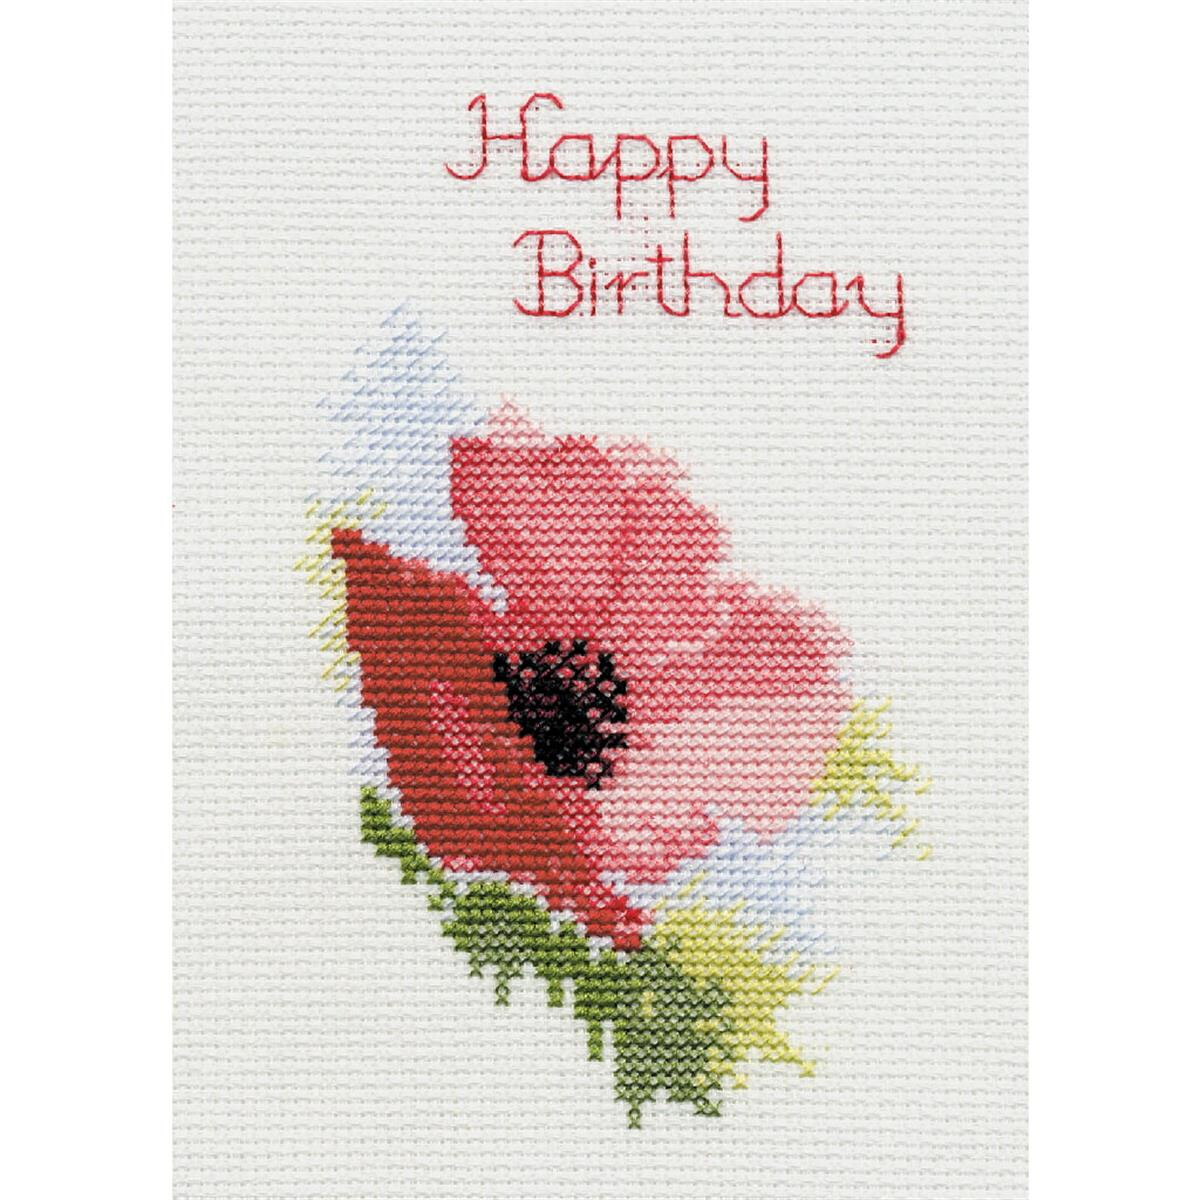 An embroidery pack (Bothy Threads) of a single red flower...